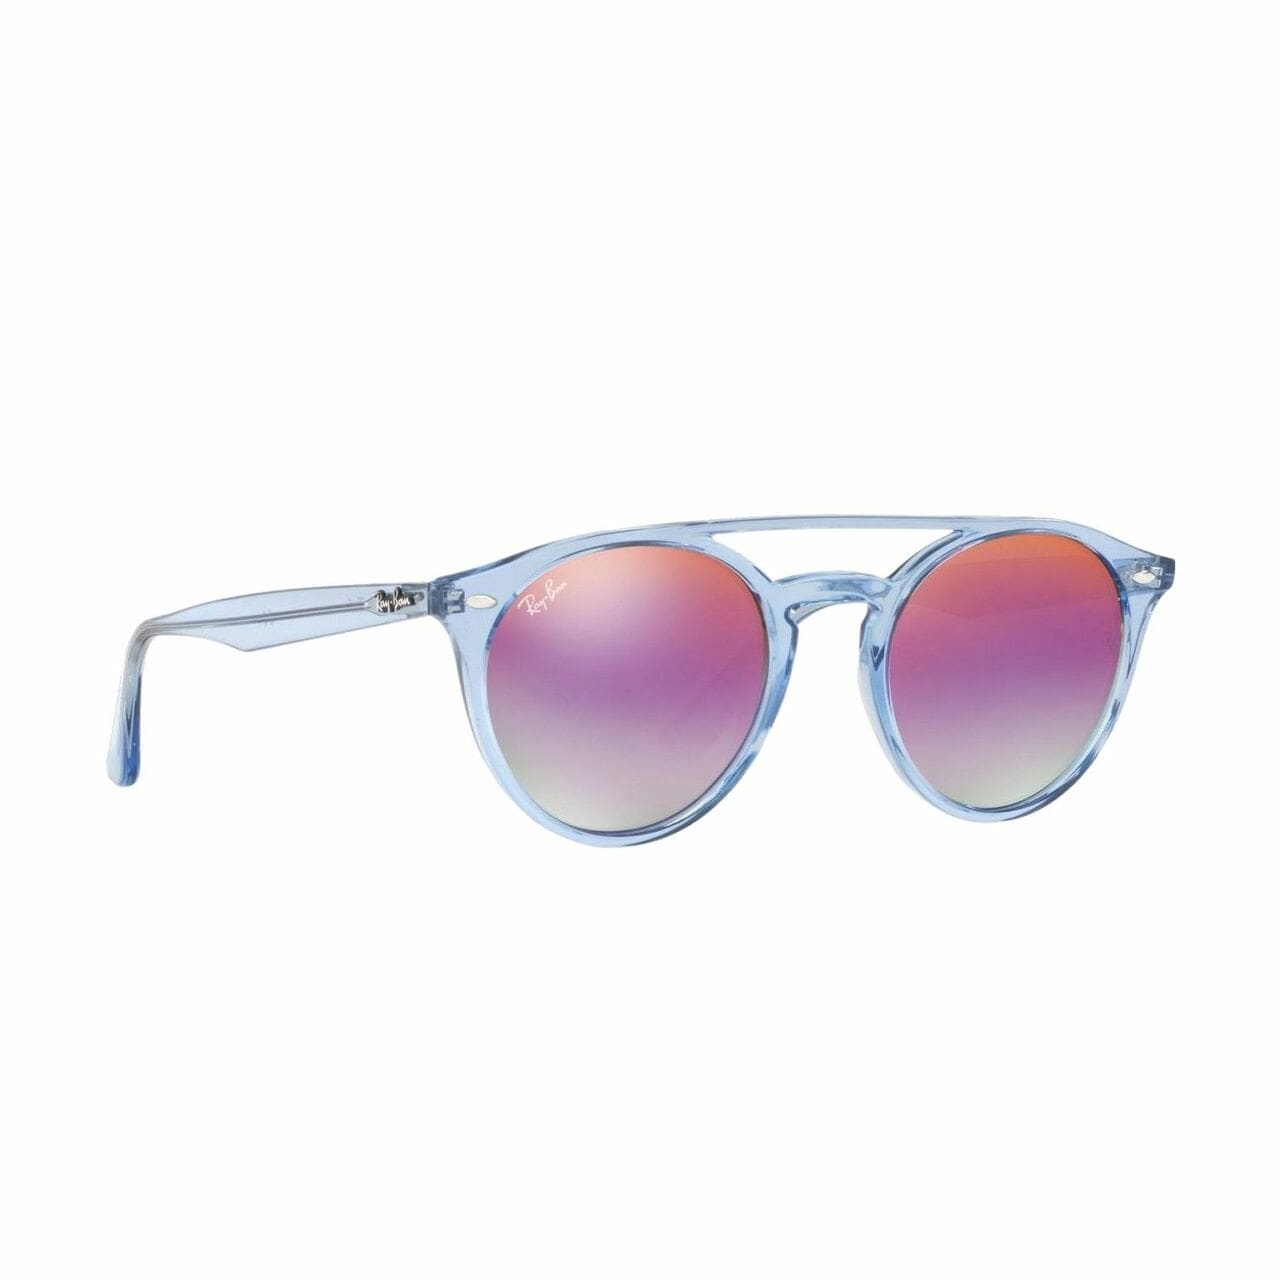 Ray-Ban RB4279-6278/A9 Light Blue Round Violet Gradient Mirror Lens Sunglasses 8053672717686